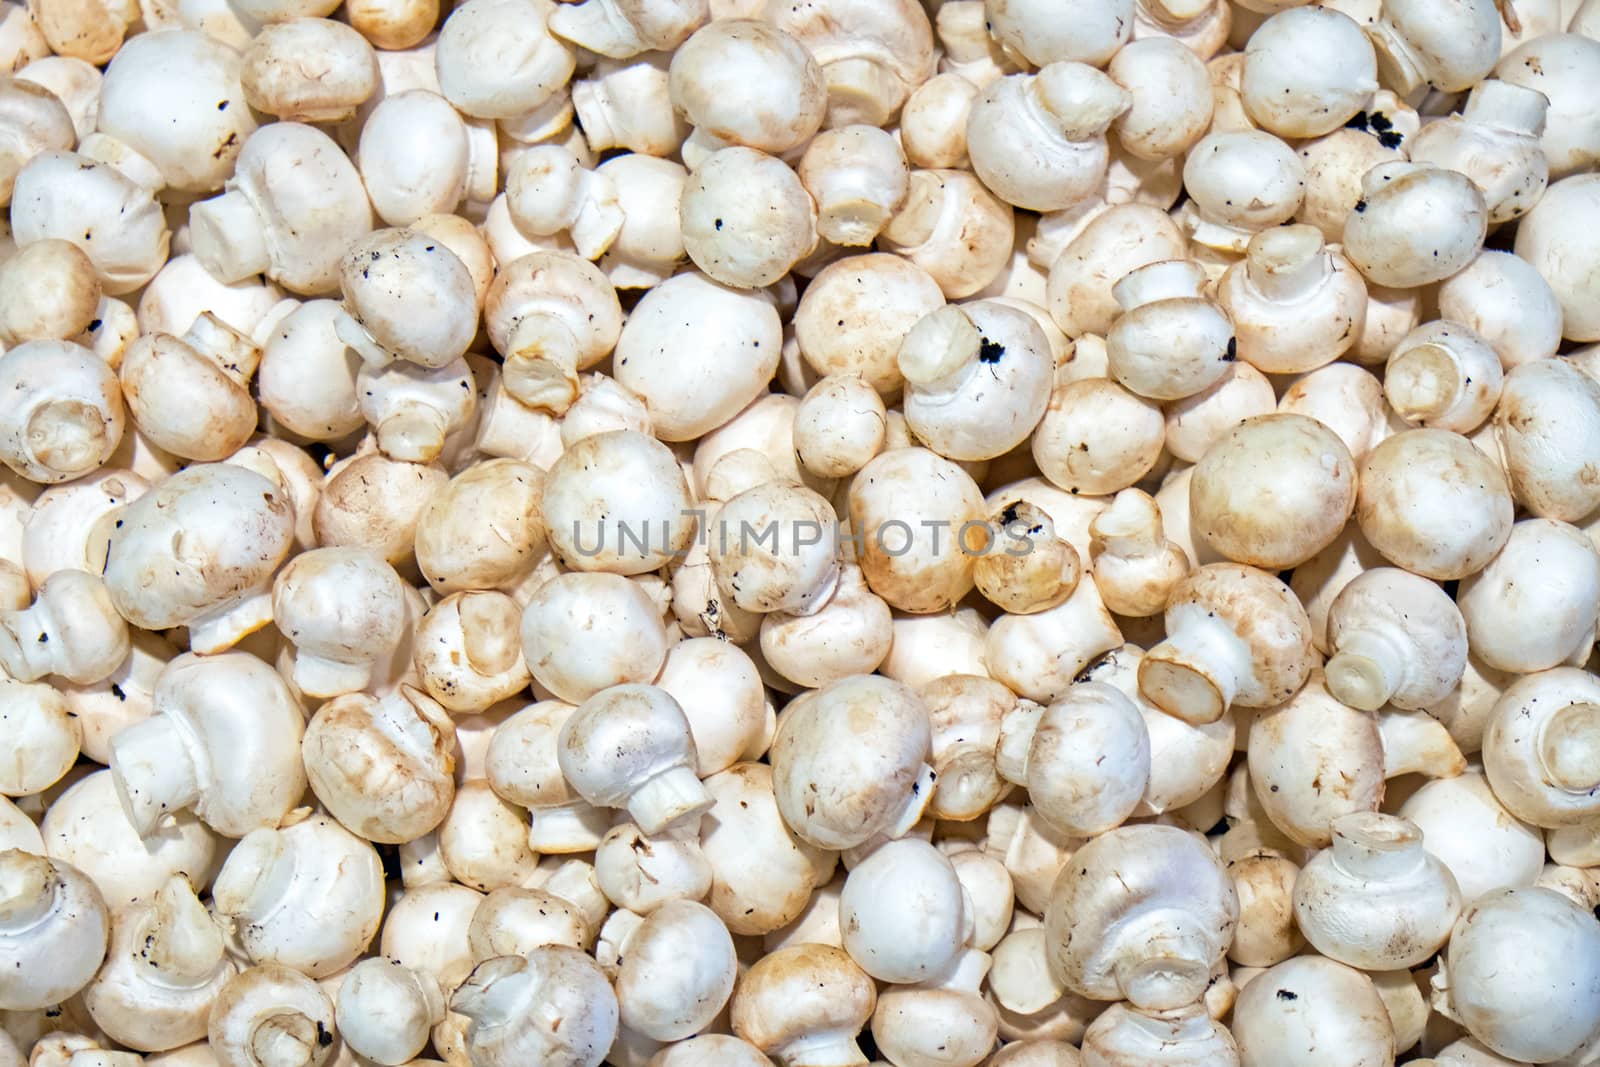 Small white champignons for sale at a market